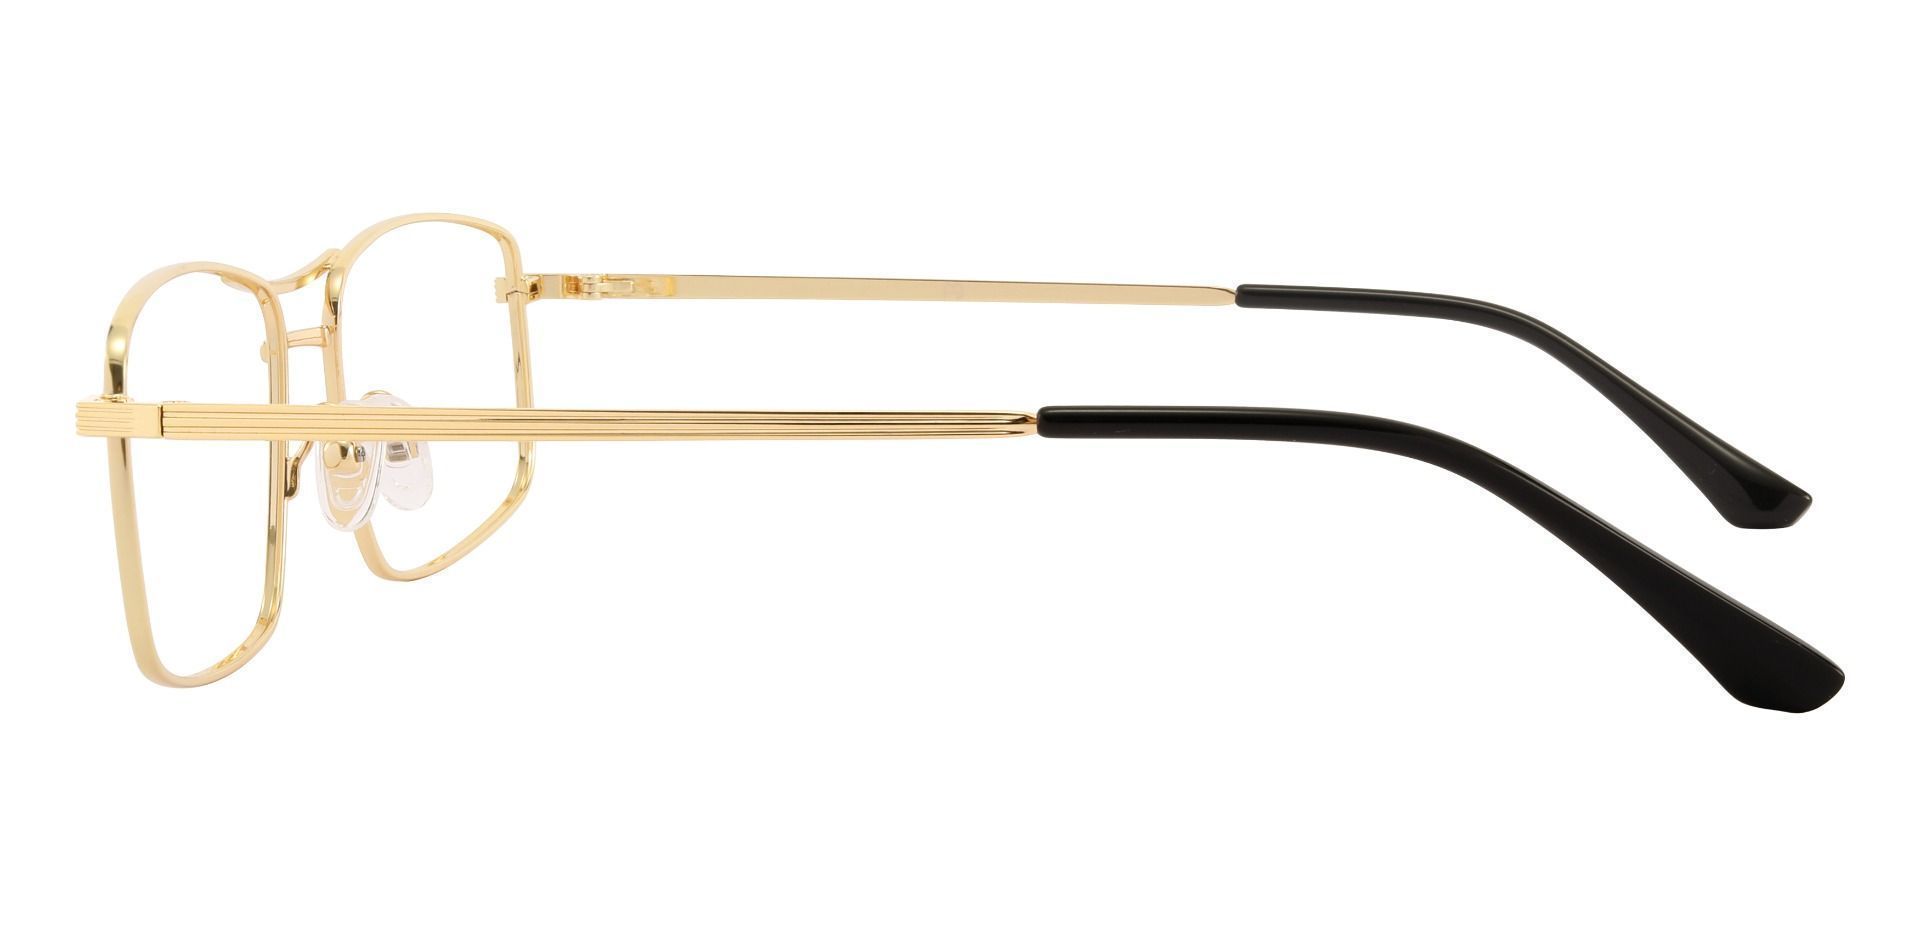 Cyril Aviator Reading Glasses - Gold